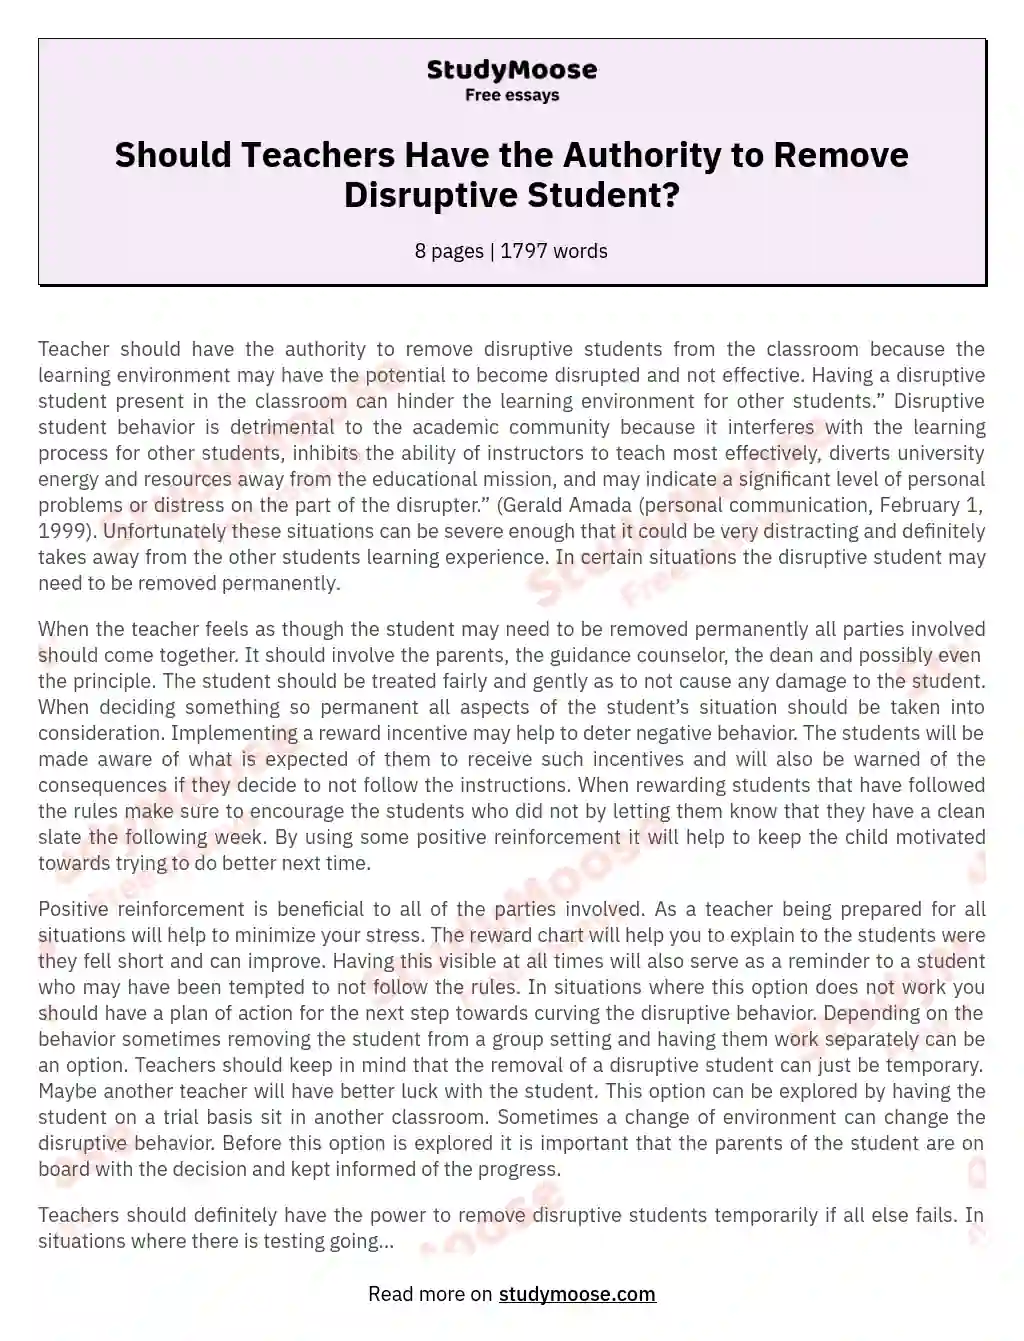 Should Teachers Have the Authority to Remove Disruptive Student?